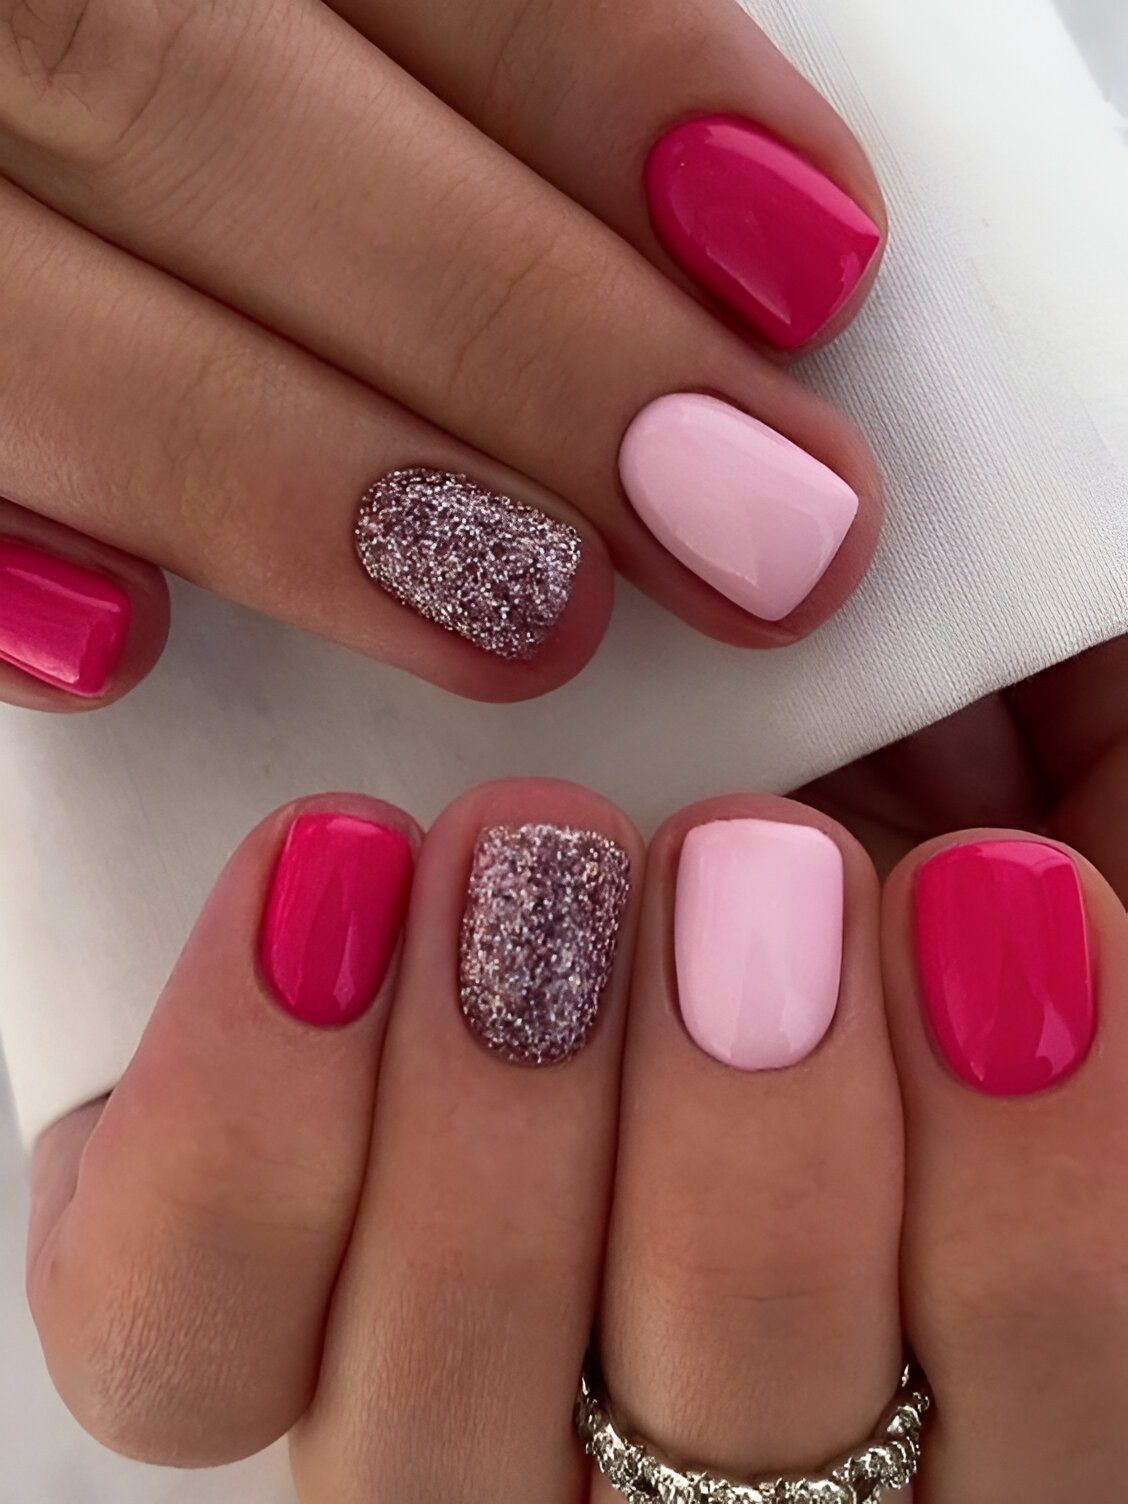 Pink February Nails Ideas 7